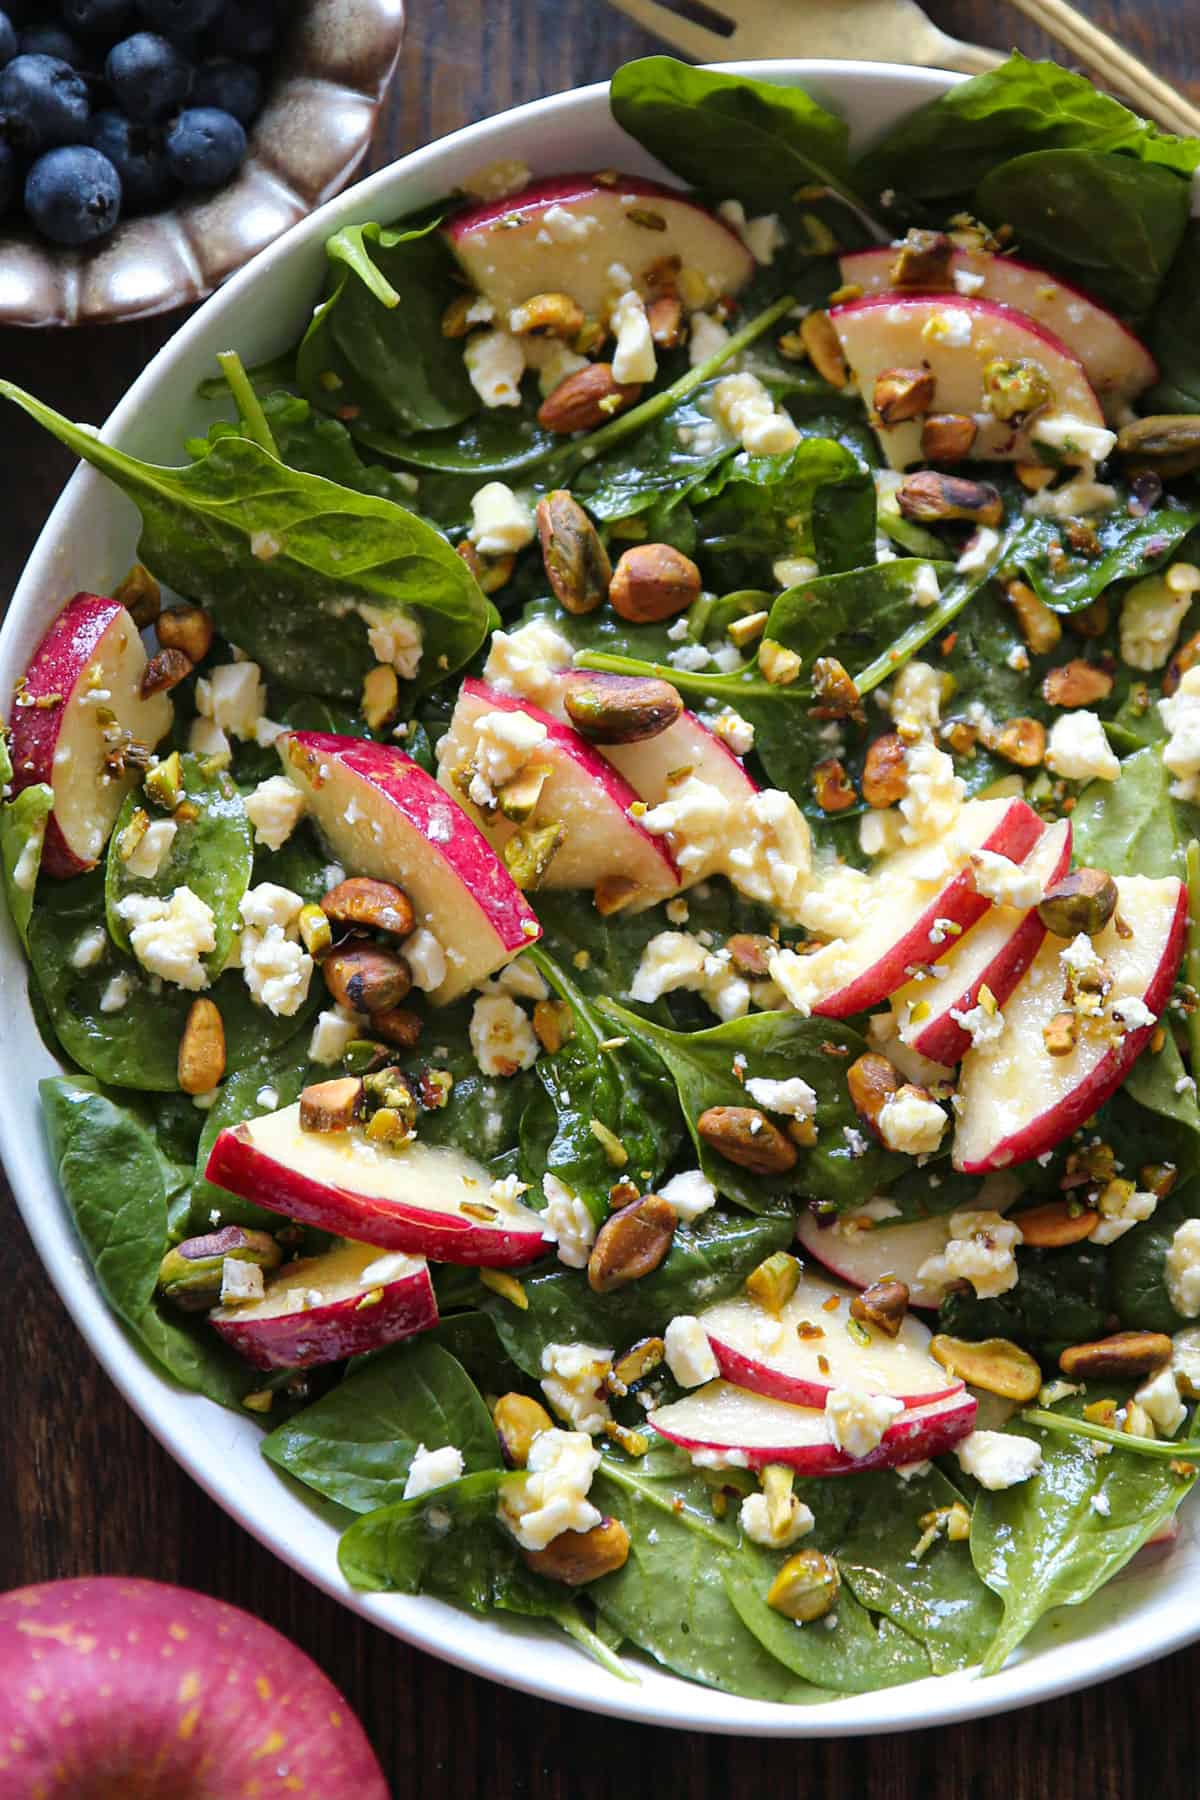 apple spinach salad with feta, pistachios, honey-mustard lemon dressing - in a white bowl.